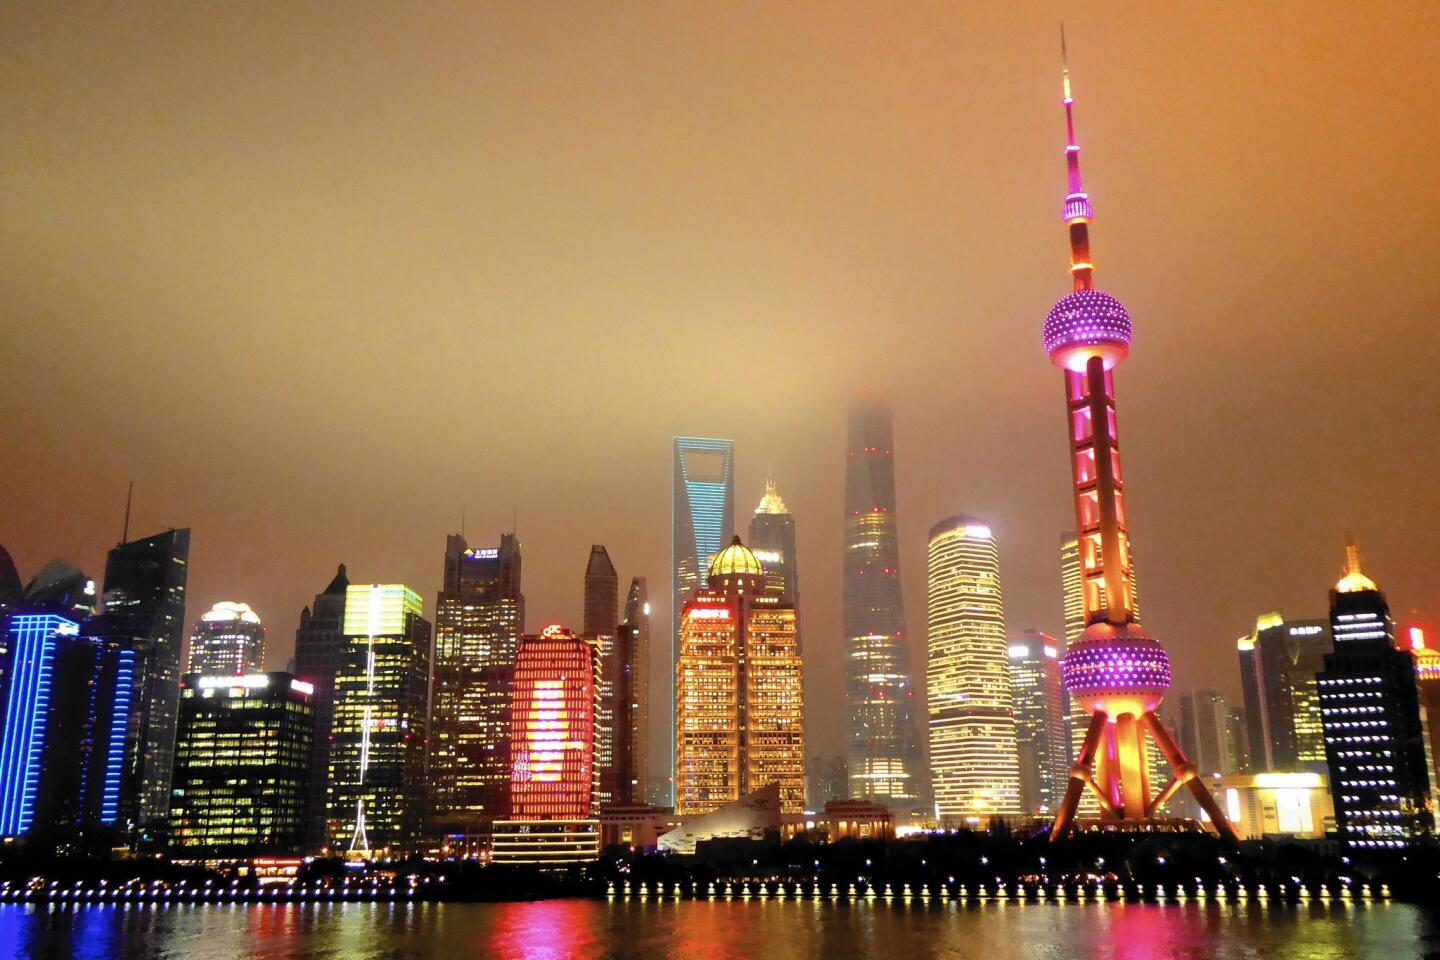 A view of the Shanghai skyline at night from the Crystal Symphony.